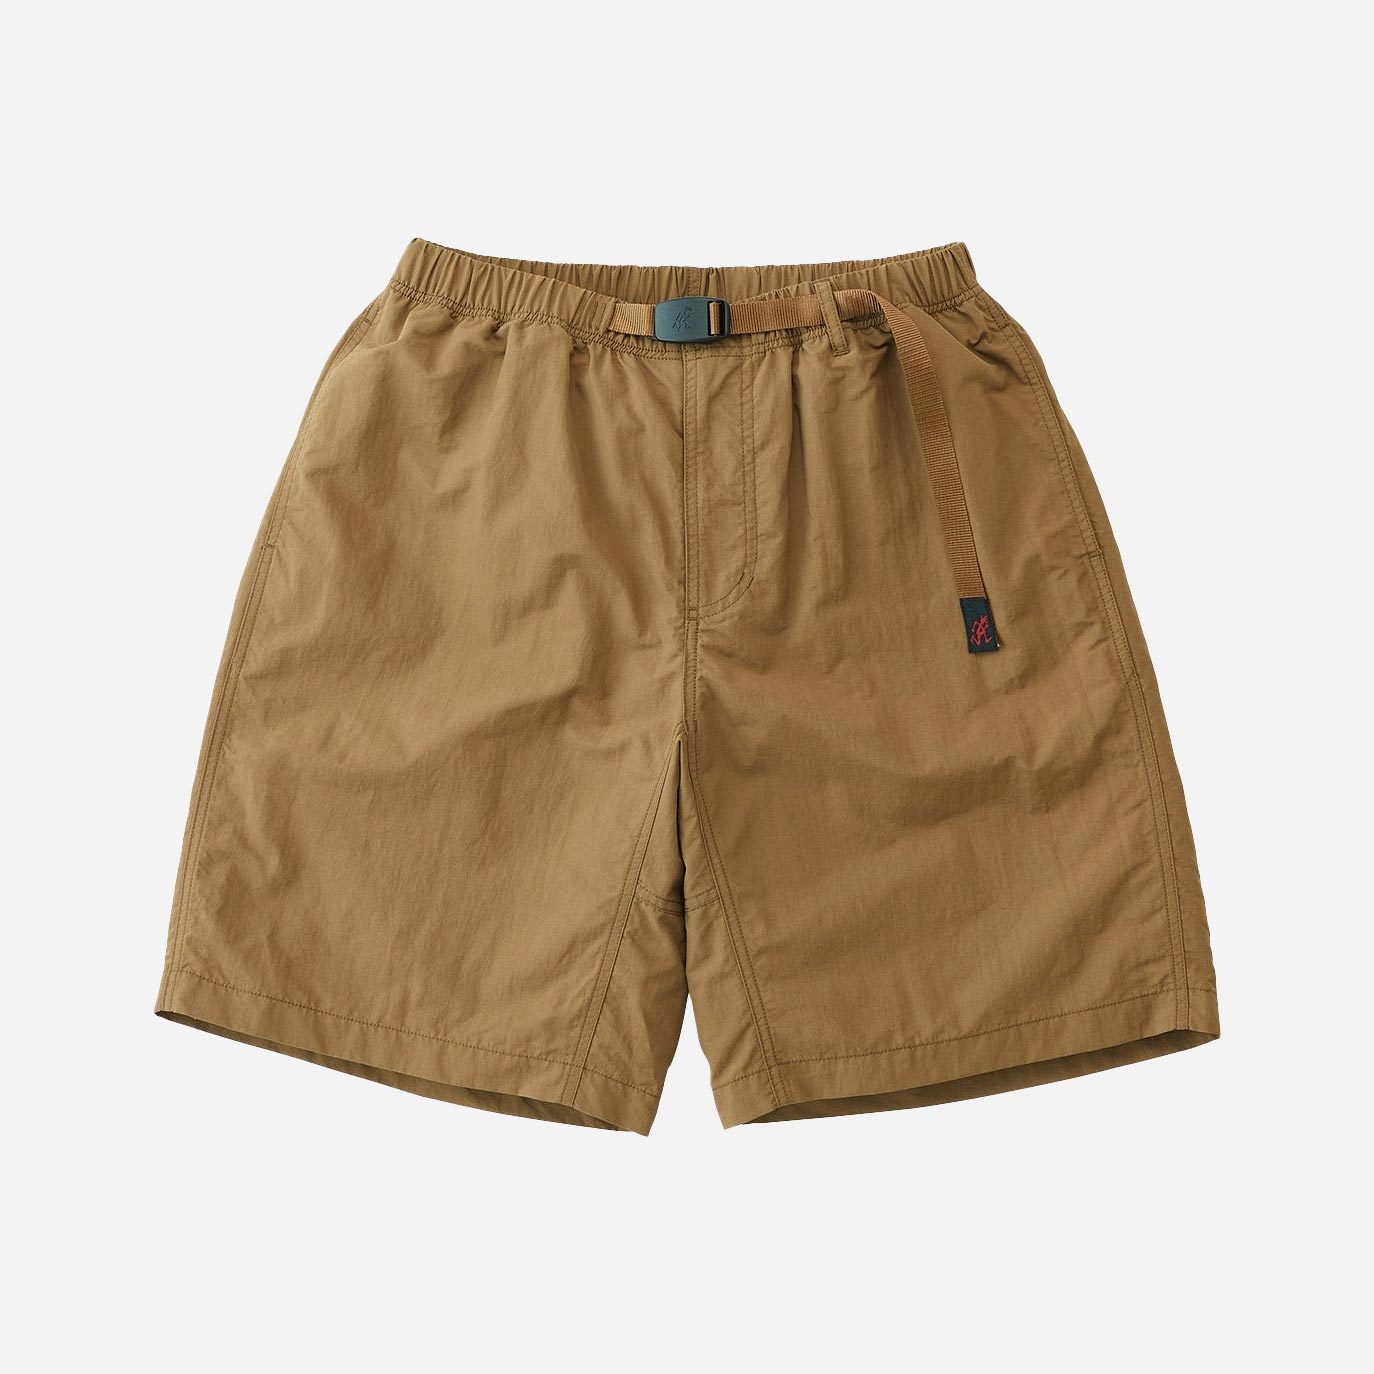 Gramicci Weather Trek Relaxed Fit Short - Coyote